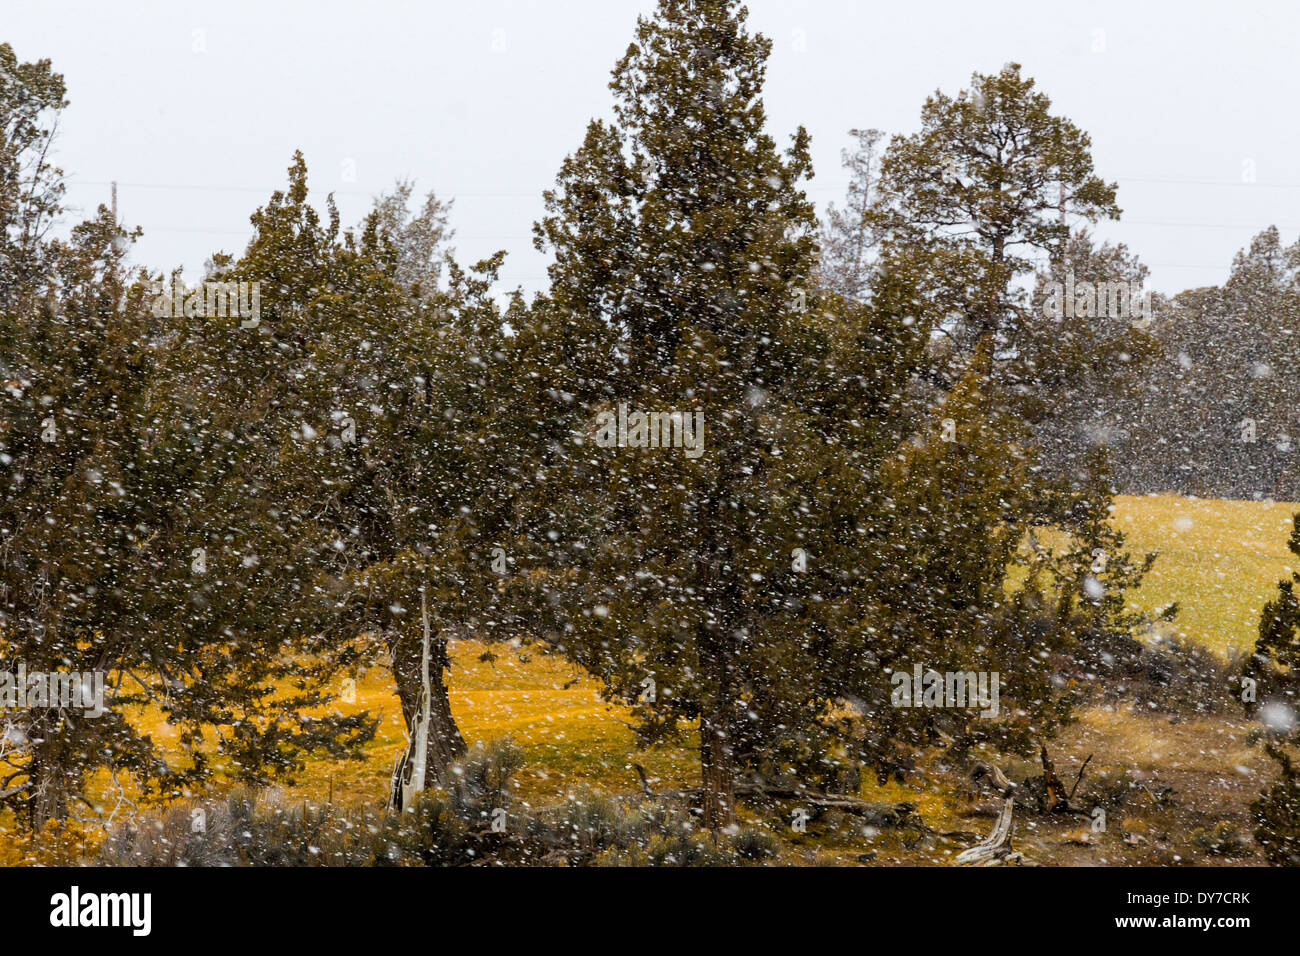 Snow falling in front of some pine trees in this incelement blizzard winter weather abstract. Stock Photo